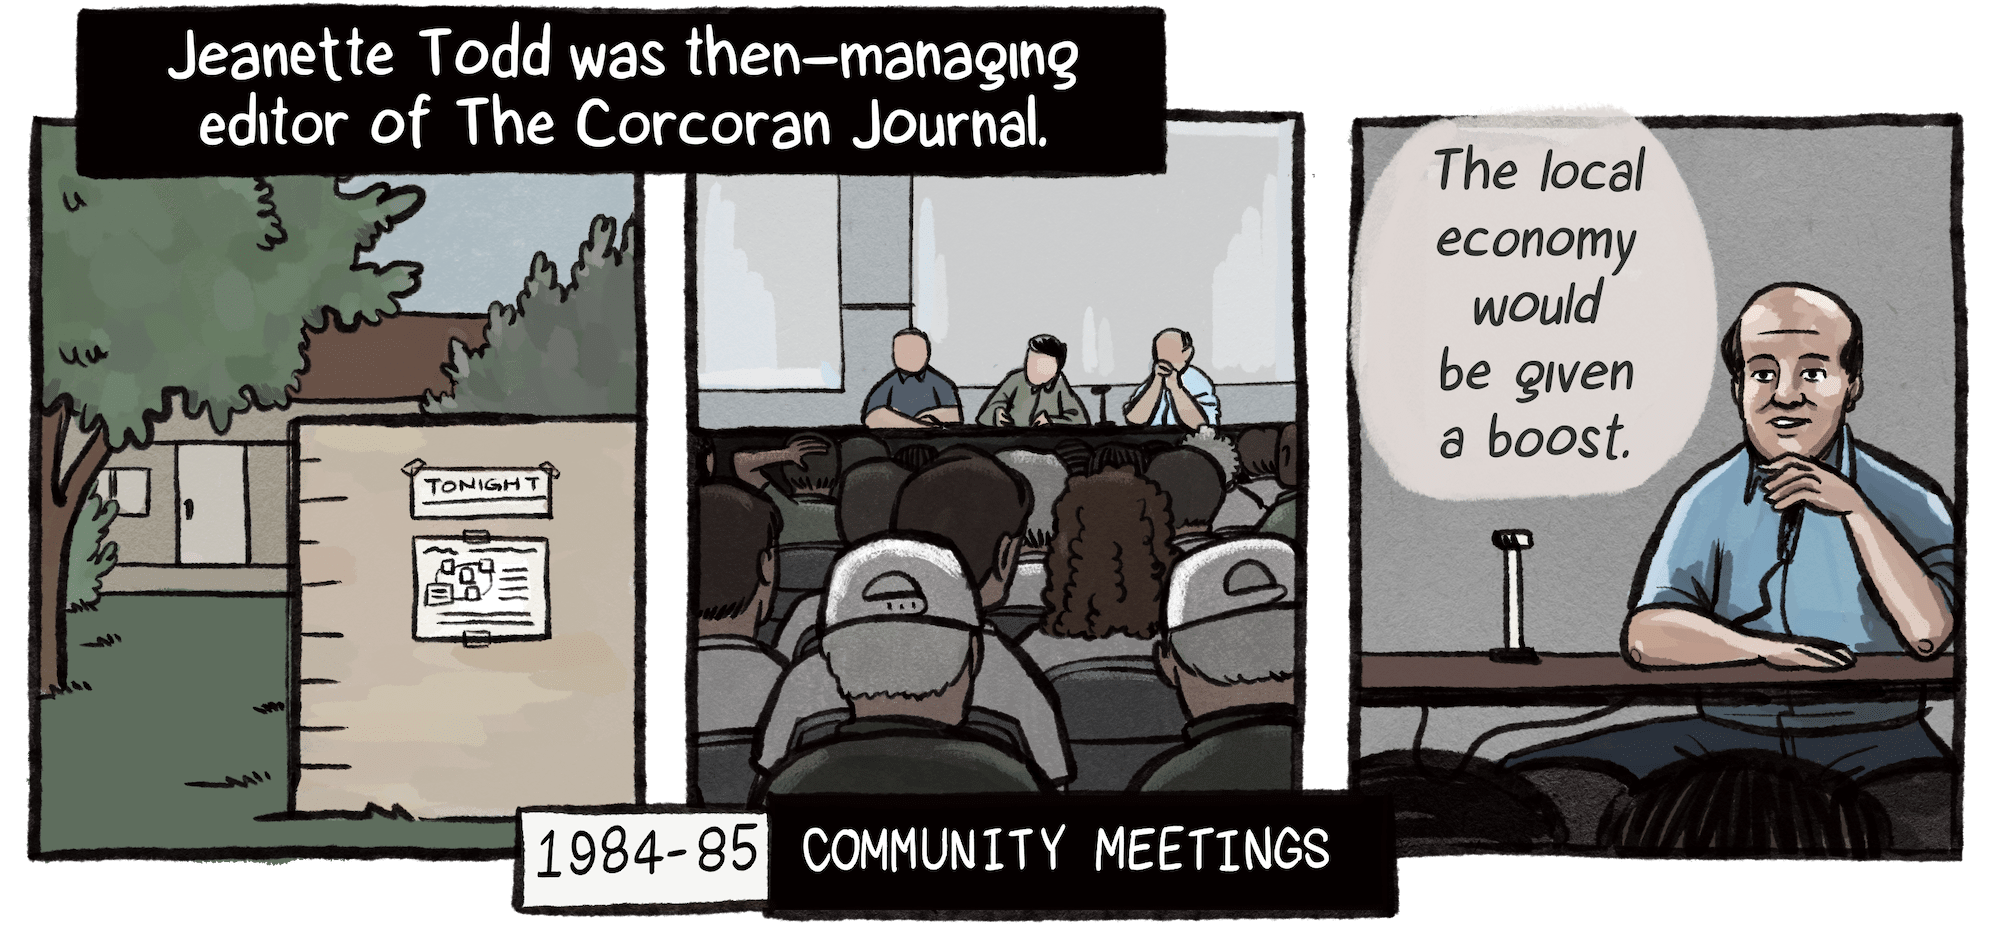 Todd was then-managing editor of The Corcoran Journal in the mid-1980s, when community meetings were held about prison construction in Corcoran. Images show scenes at a meeting and an official, who is a White man, says, “The local economy would be given a boost.”